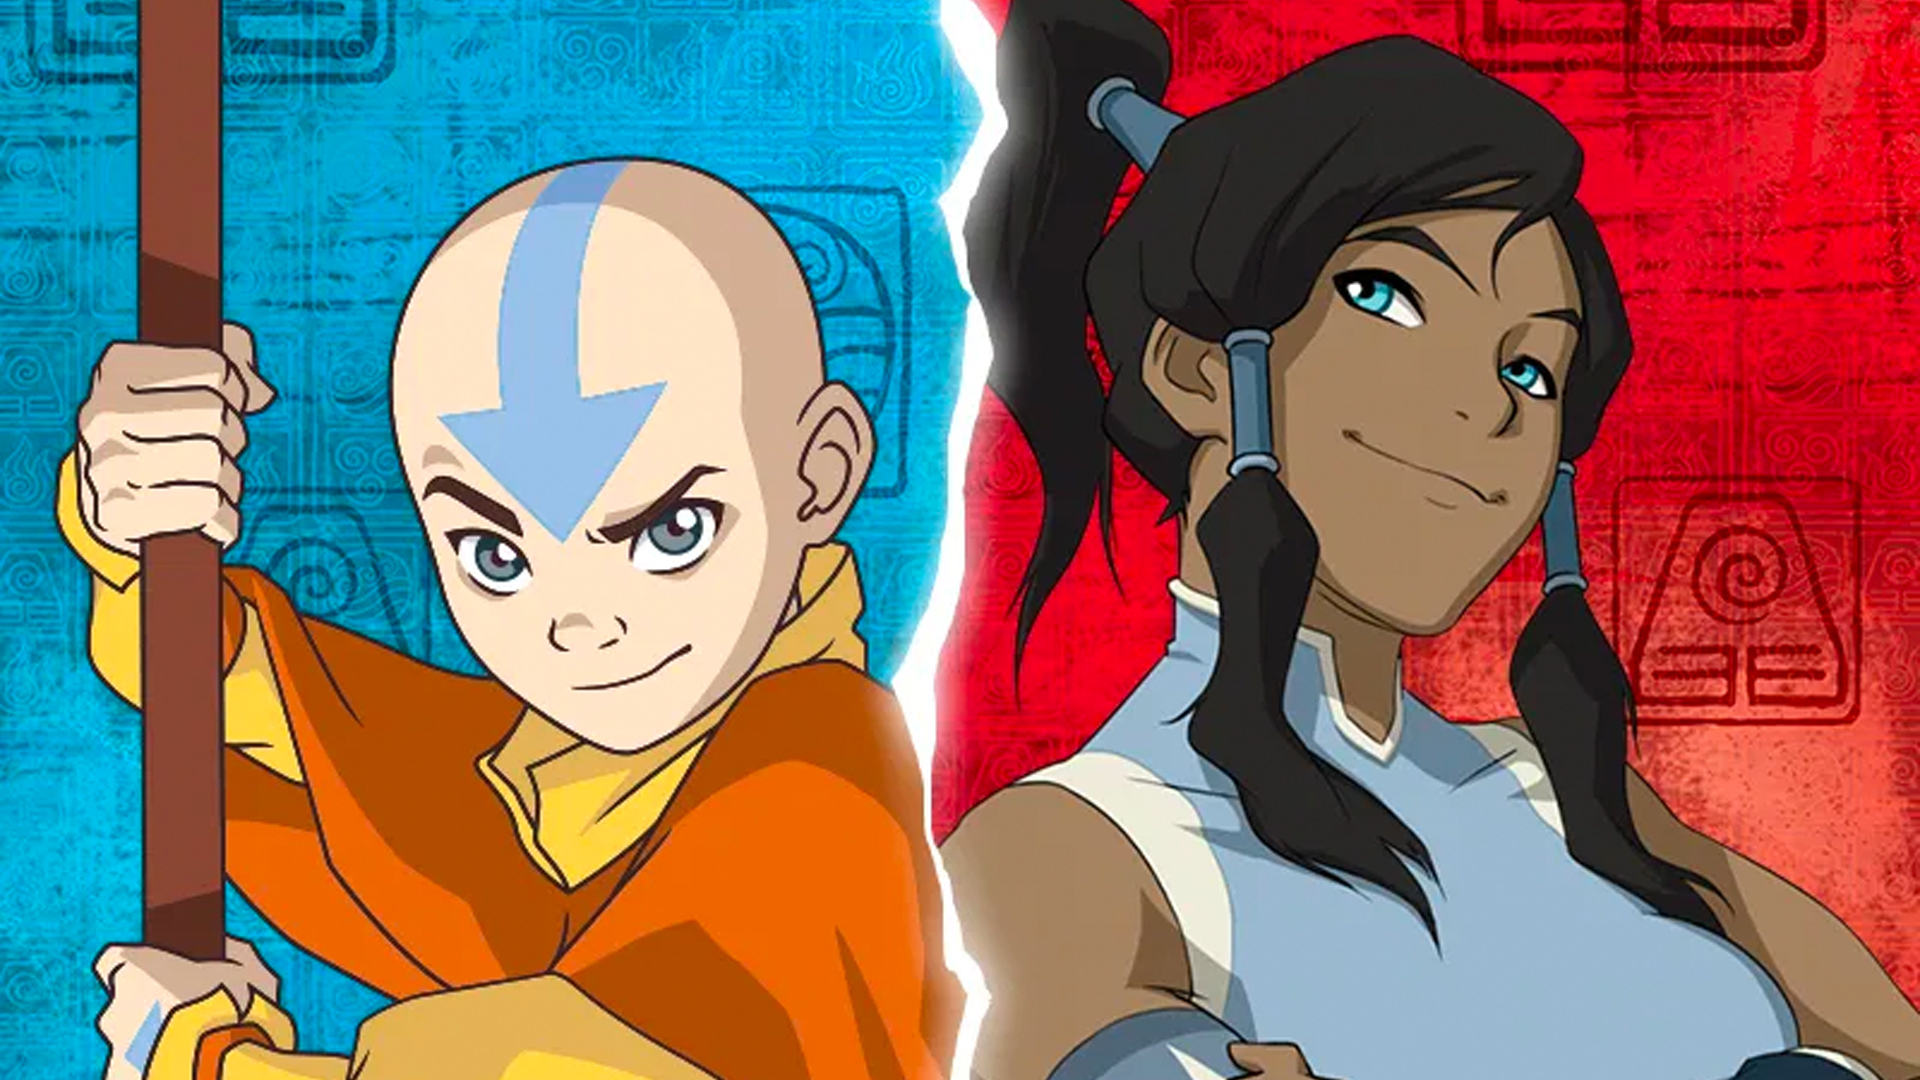 Avatar The Last Airbender creators have plans to expand universe